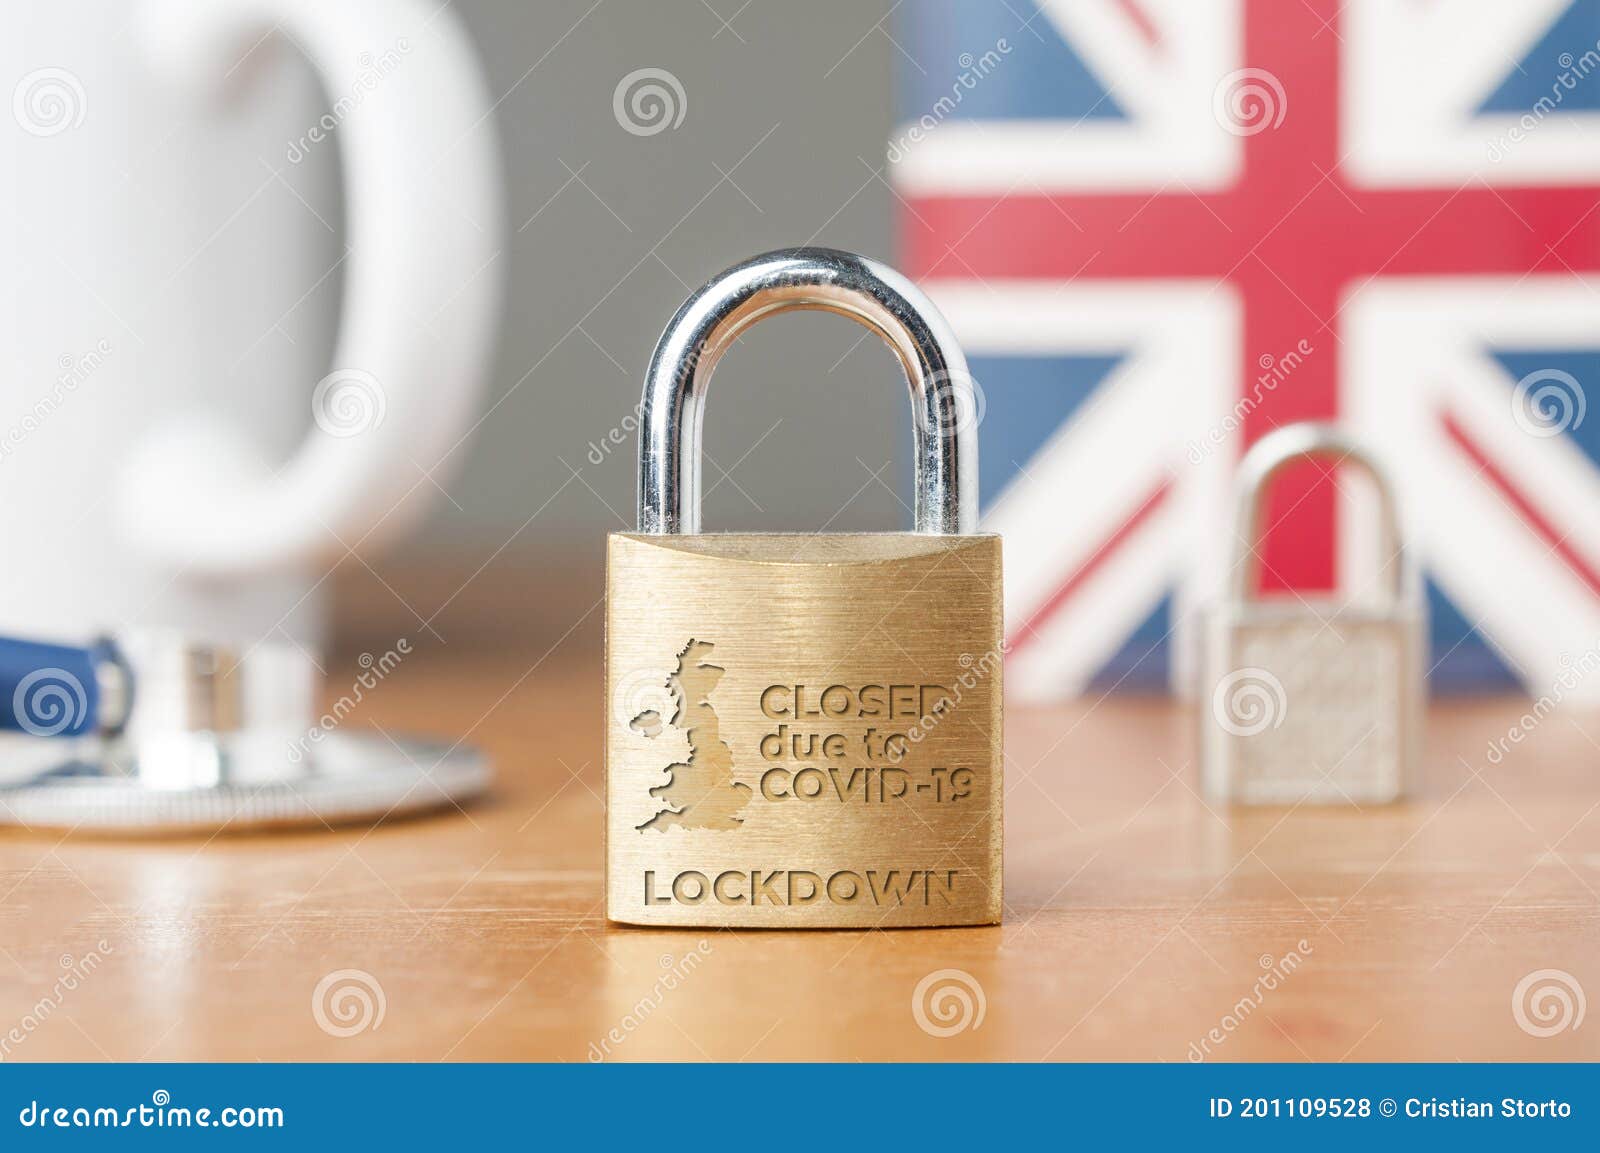 covid-19 uk lockdown concept. a lock with the message